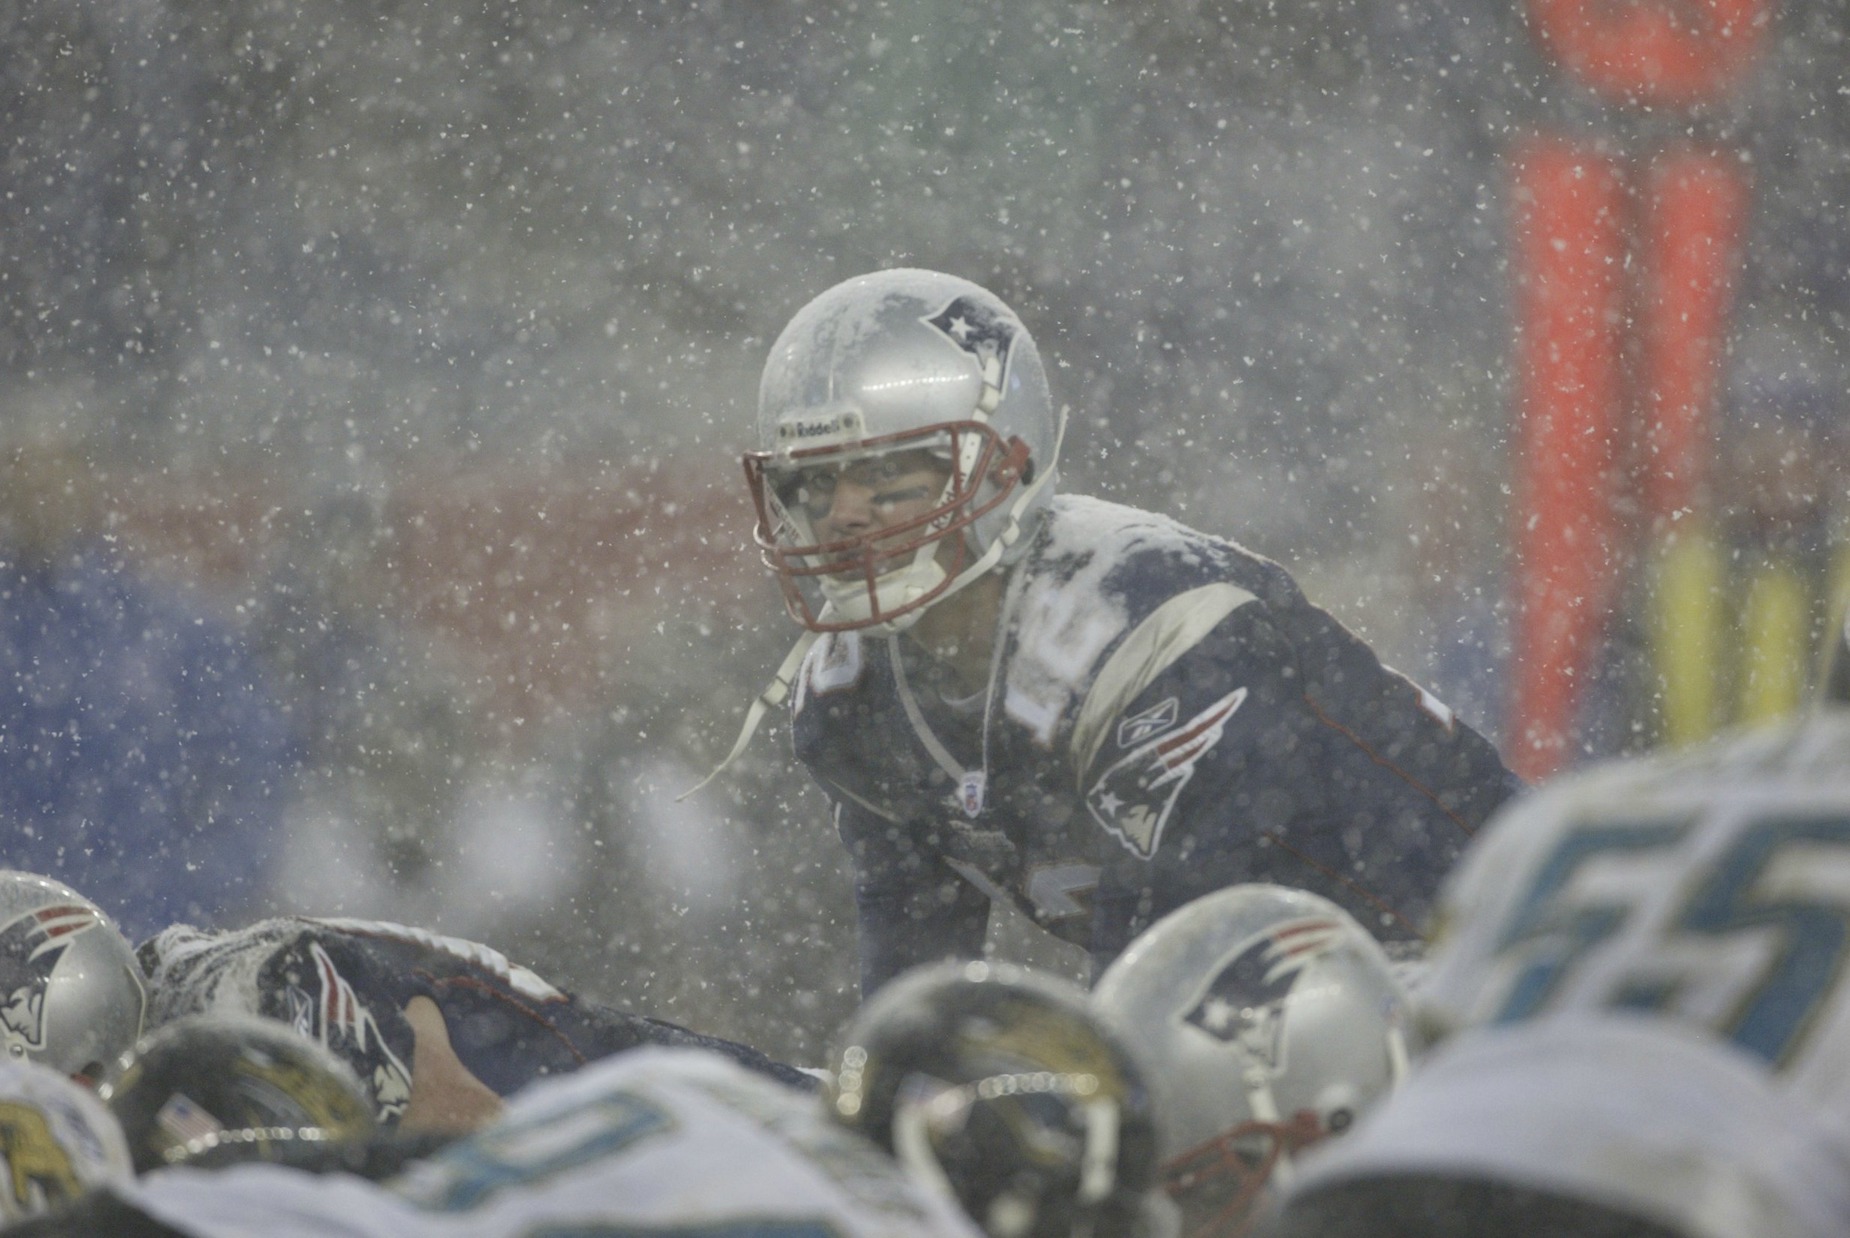 Tom Brady lines up under center in the snow.